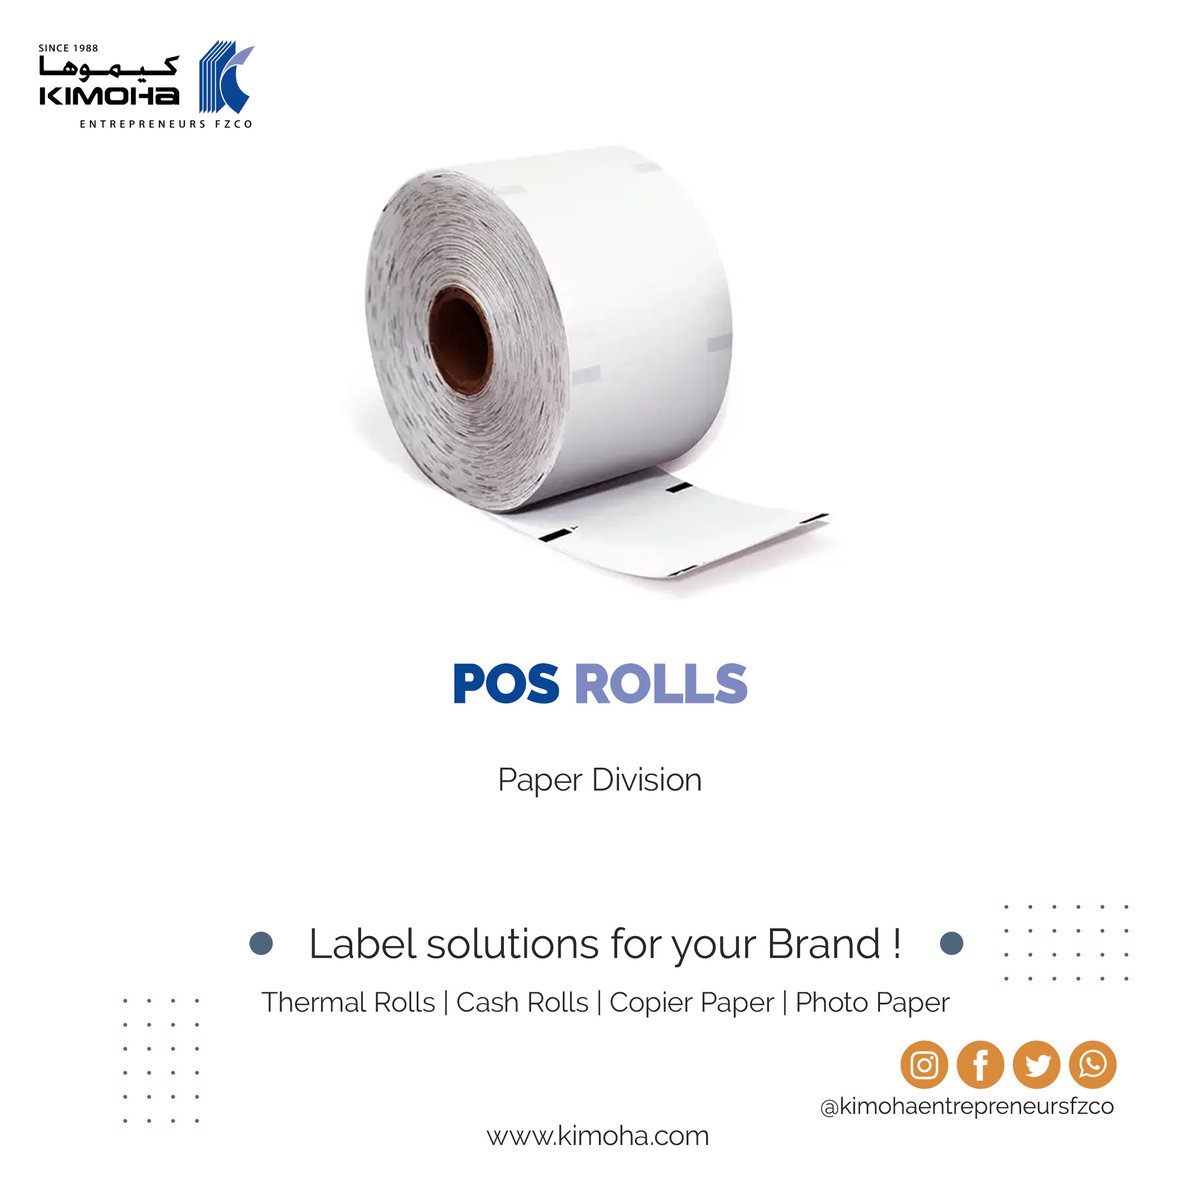 #paperroll #wideformat #paperrolls #paper #quetickets #carbonlesspaper #paperply #paperindustry #qtickets #quetickets #ticketrolls #plotterpaper #ppc #inkjet #thermalrolls #pos #posrolls #barcodeprinters #barcodescanners #labels #packagingsolutions #printingservices #POS